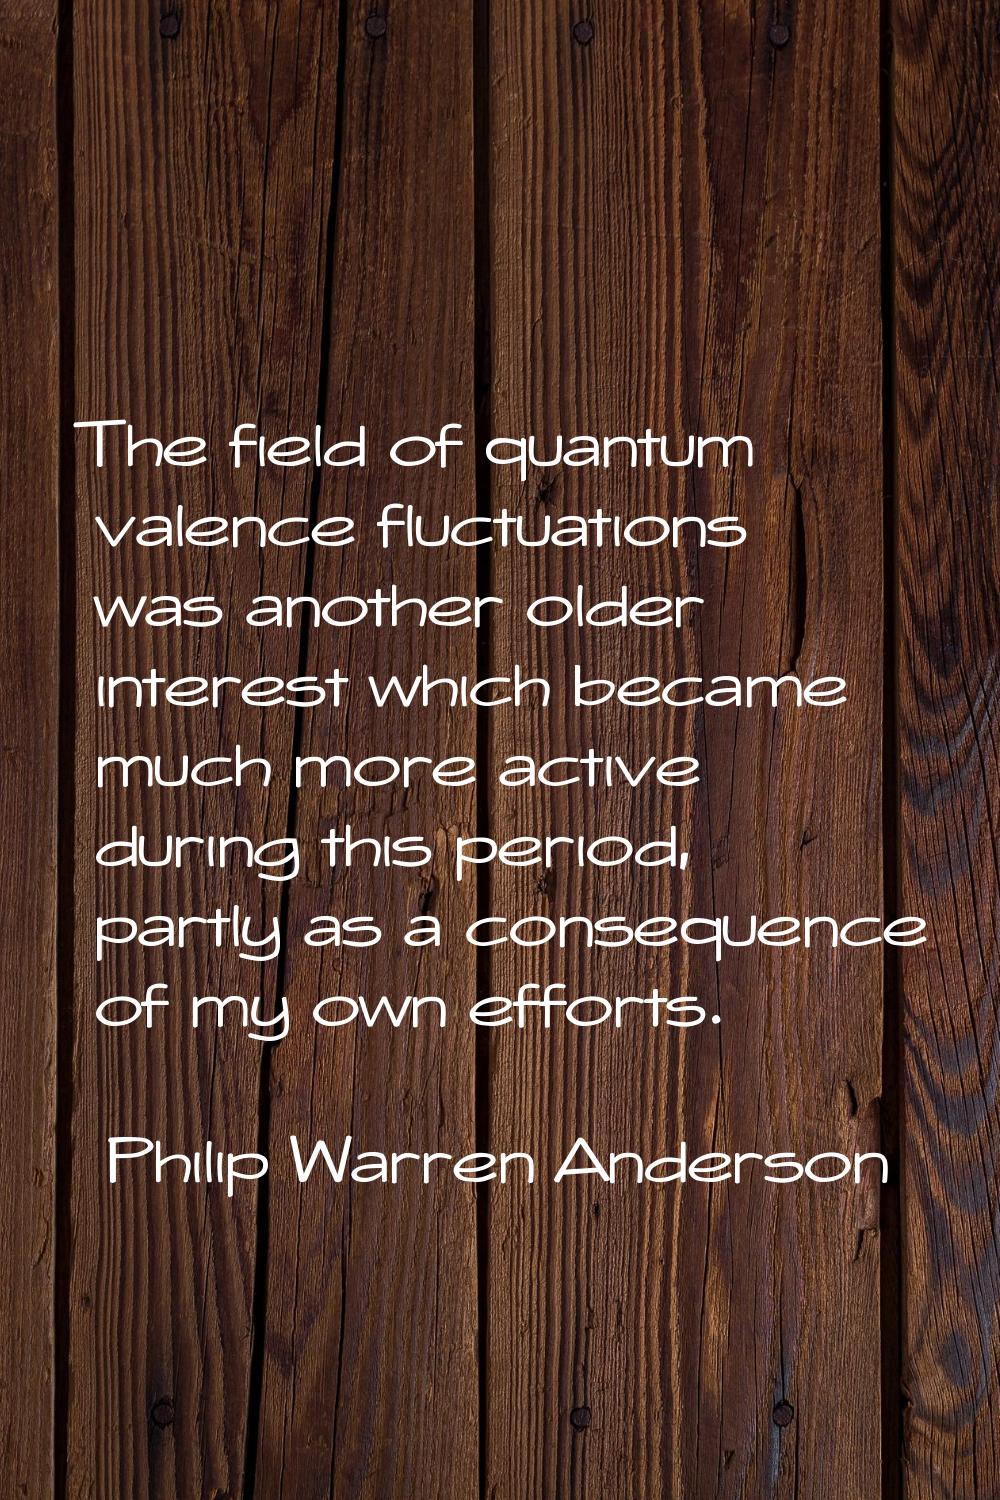 The field of quantum valence fluctuations was another older interest which became much more active 